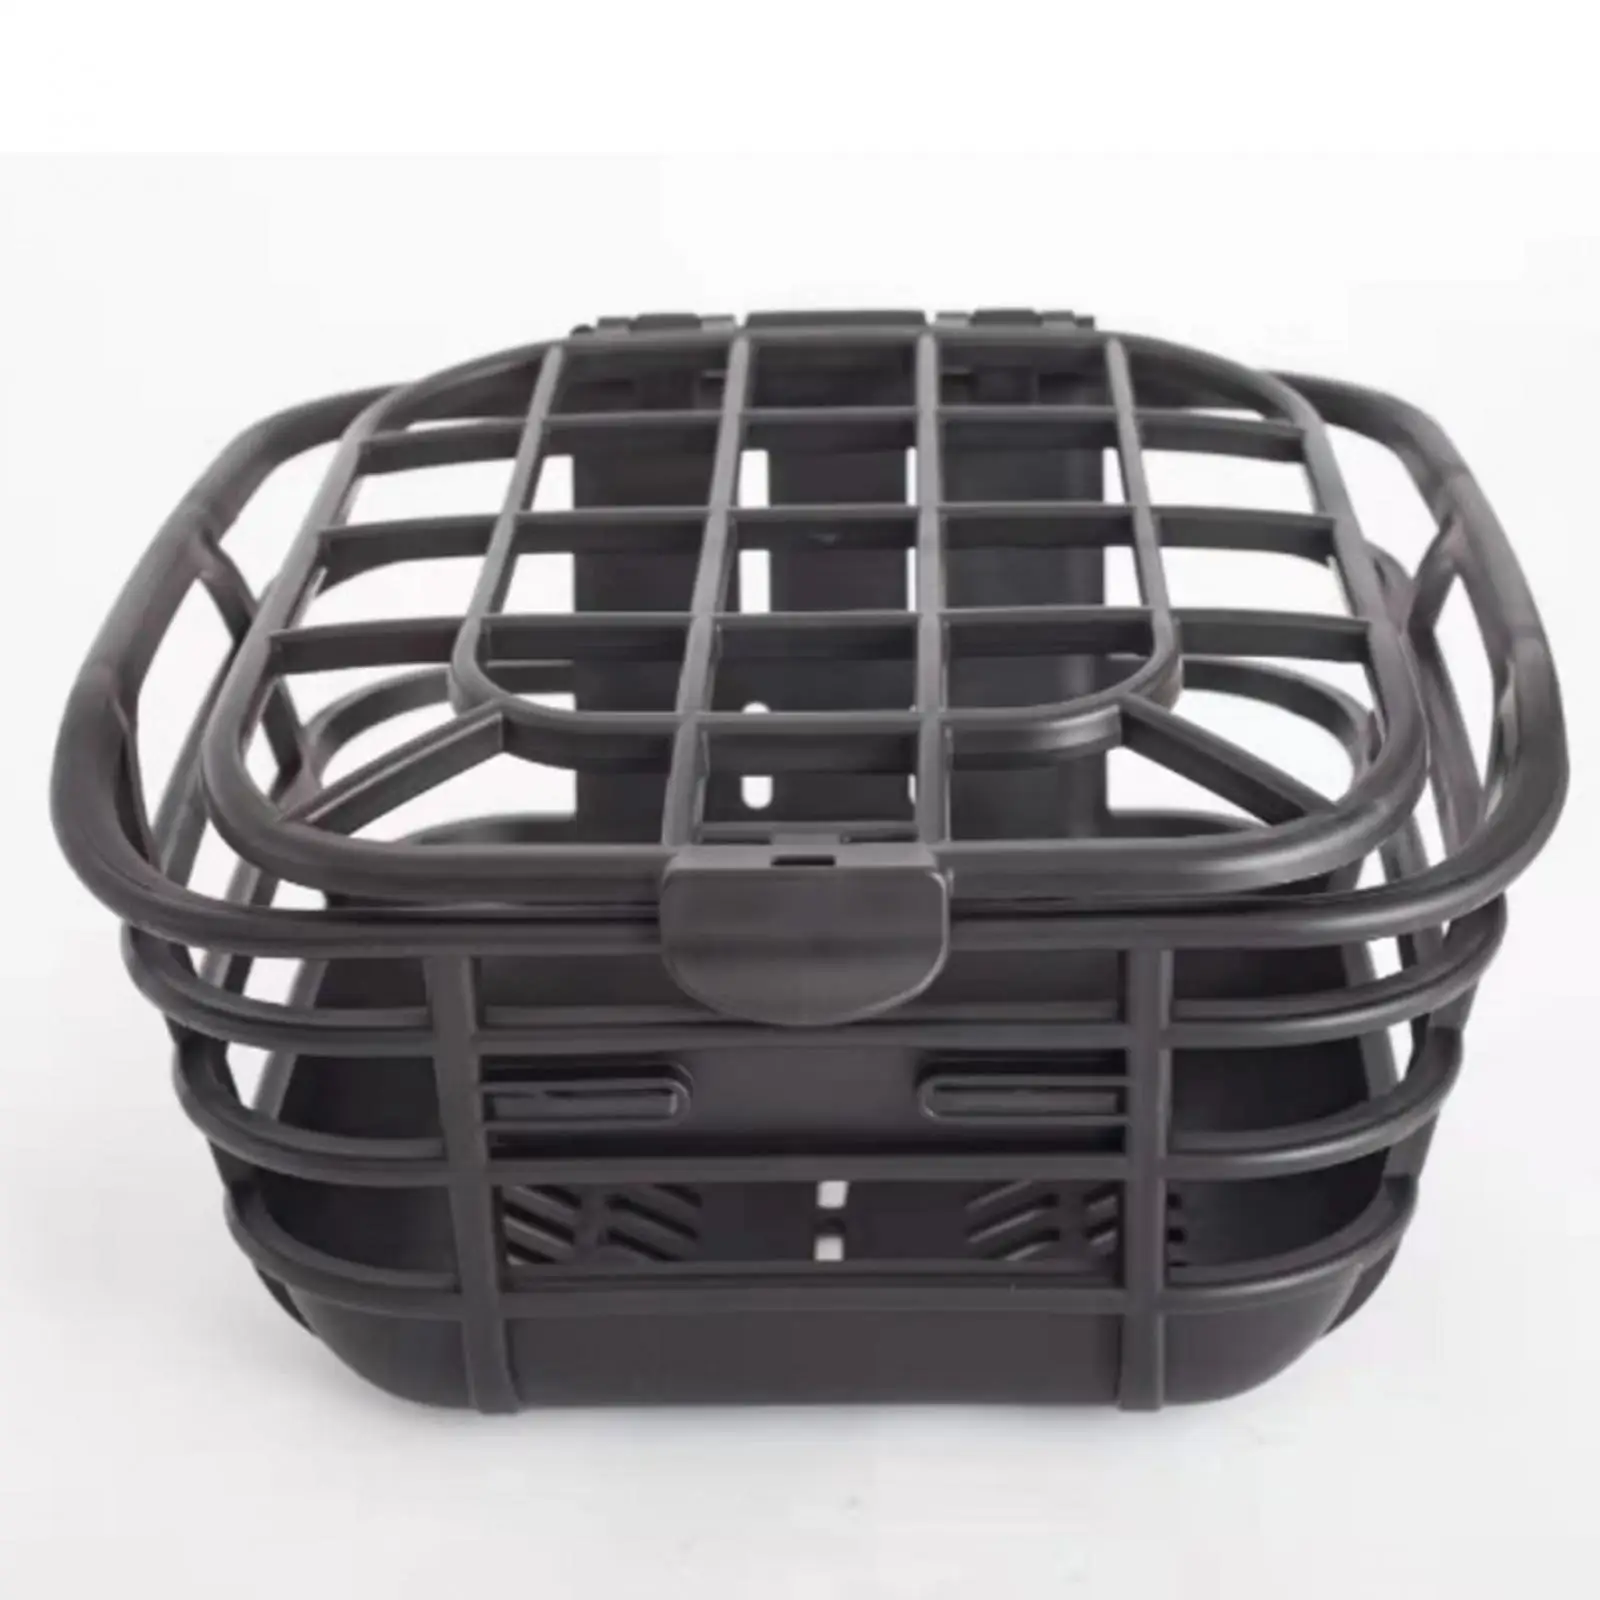 Bike Basket Large Capacity Sundries Container Bicycle Front Basket with Lid for Riding Electric Bikes Kids Bikes Road Bikes